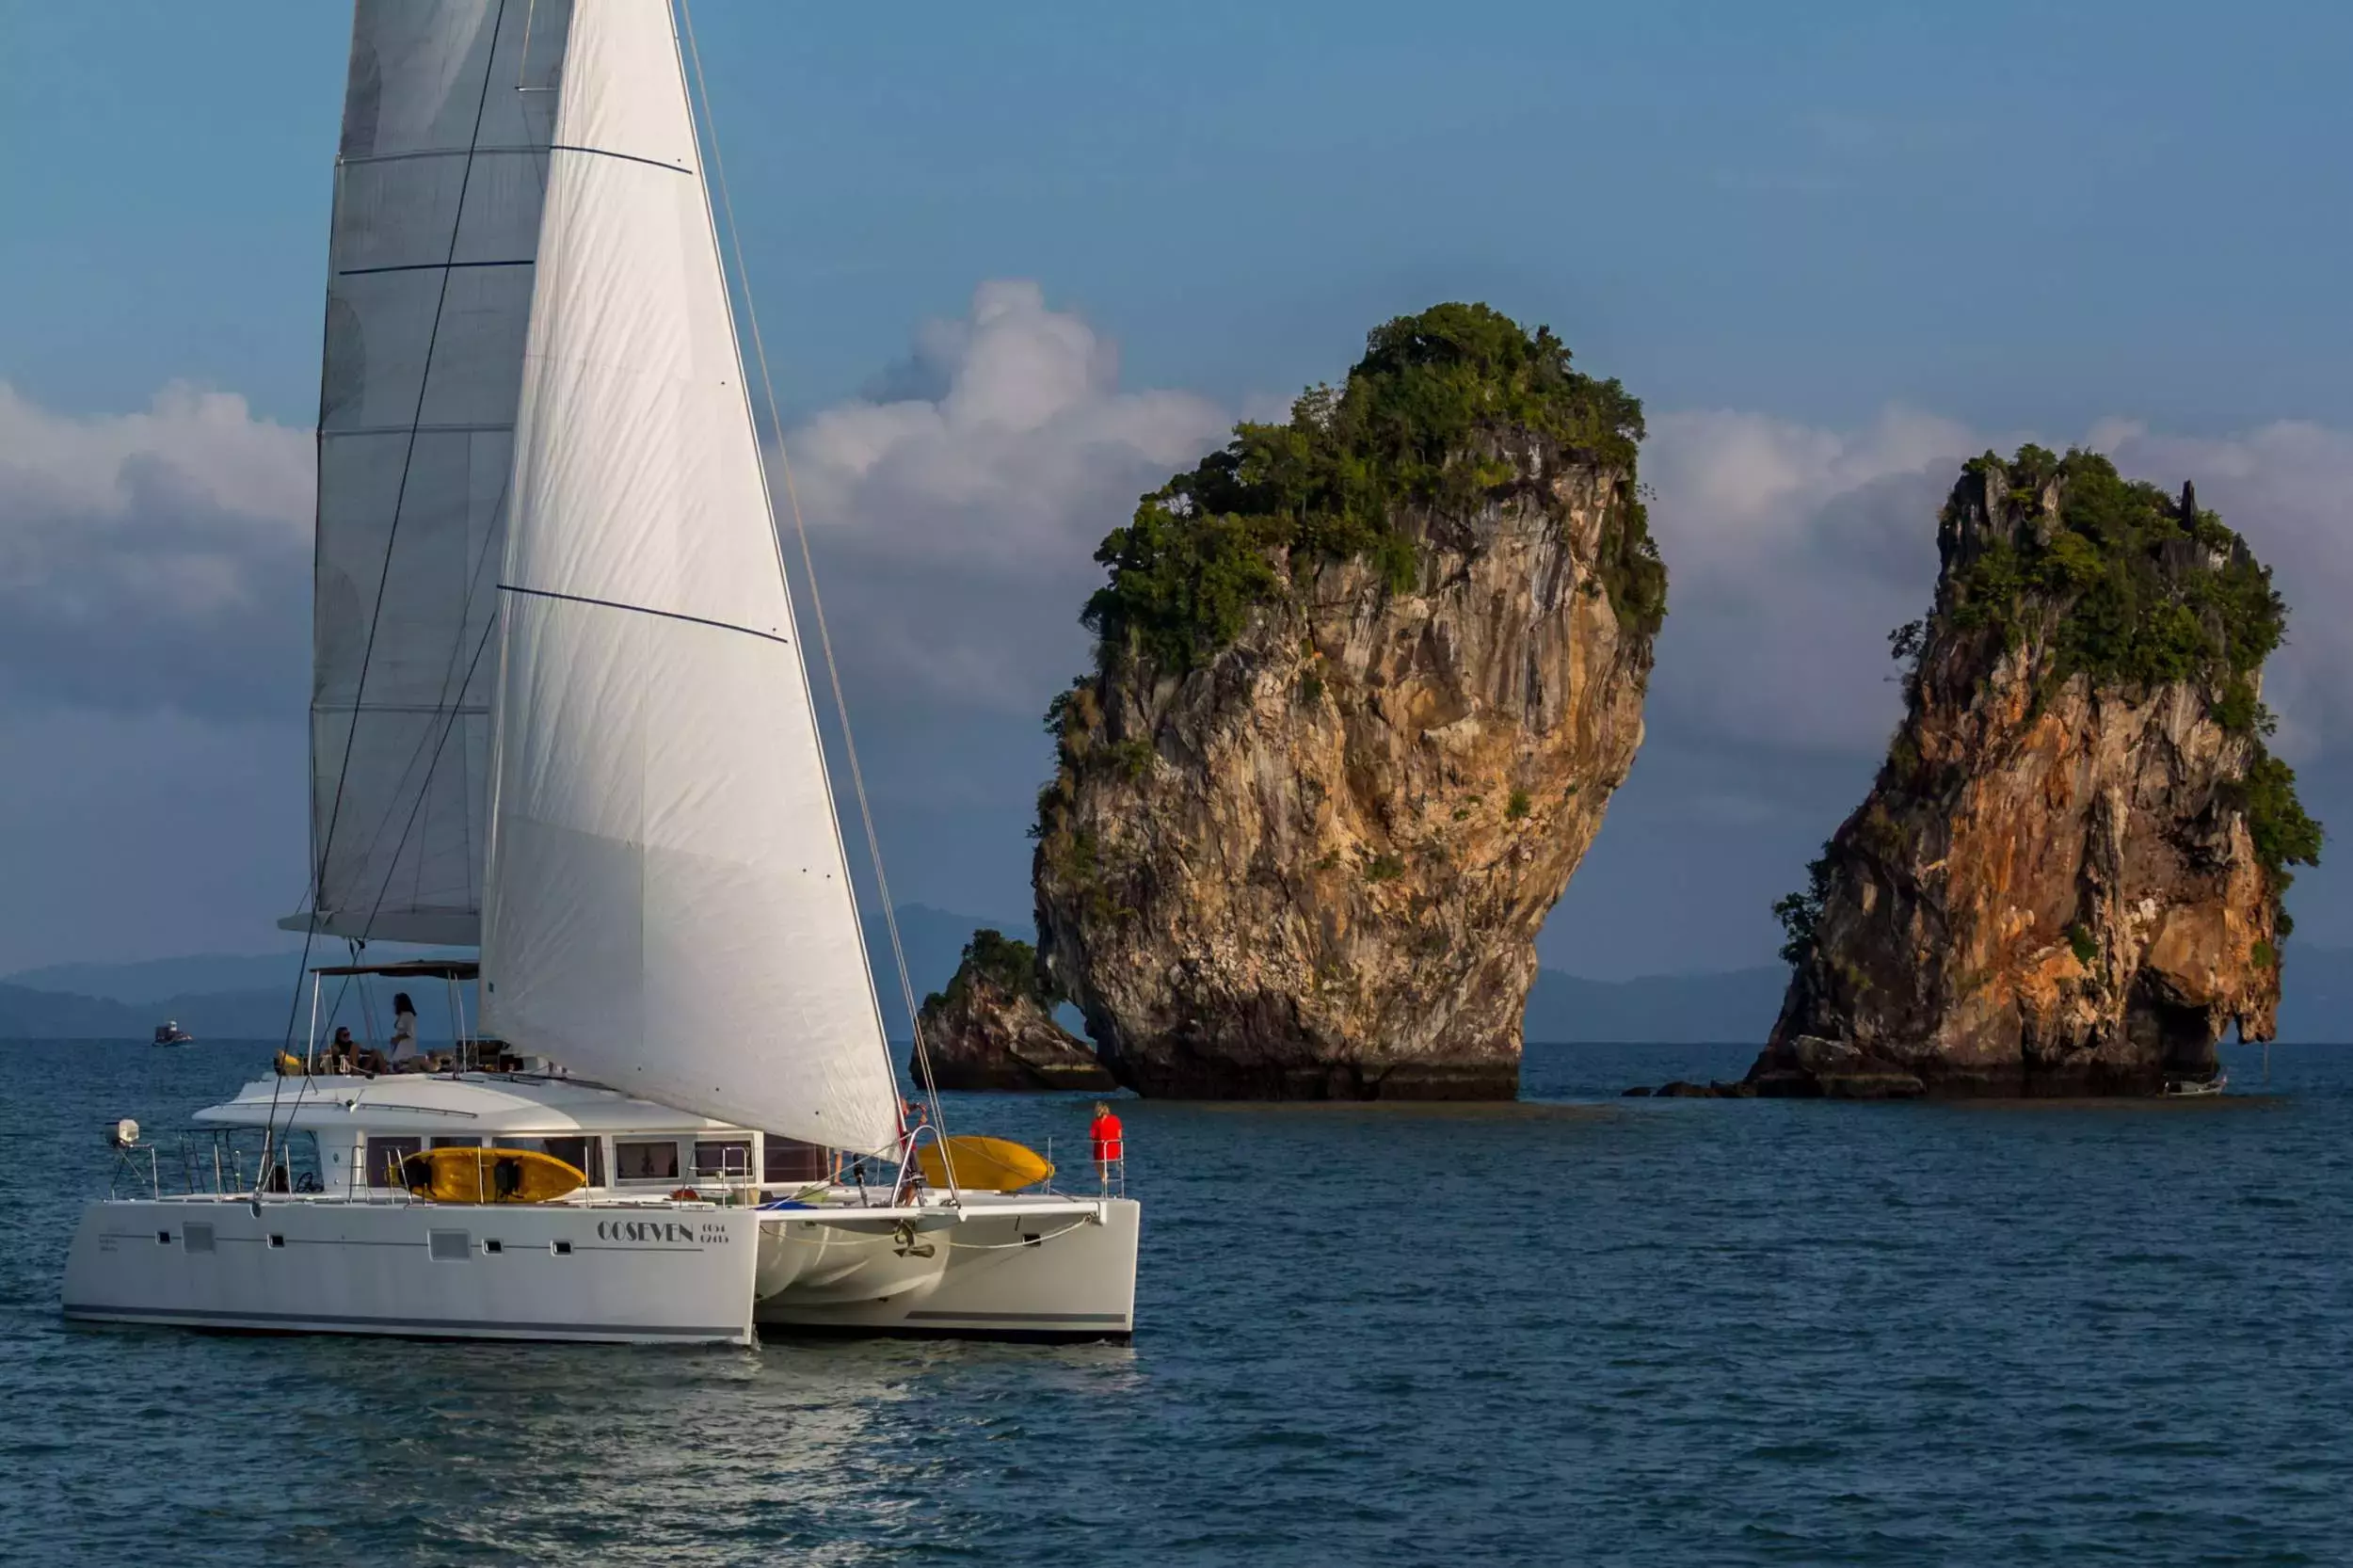 00SEVEN by Jeanneau - Special Offer for a private Sailing Catamaran Rental in Pattaya with a crew